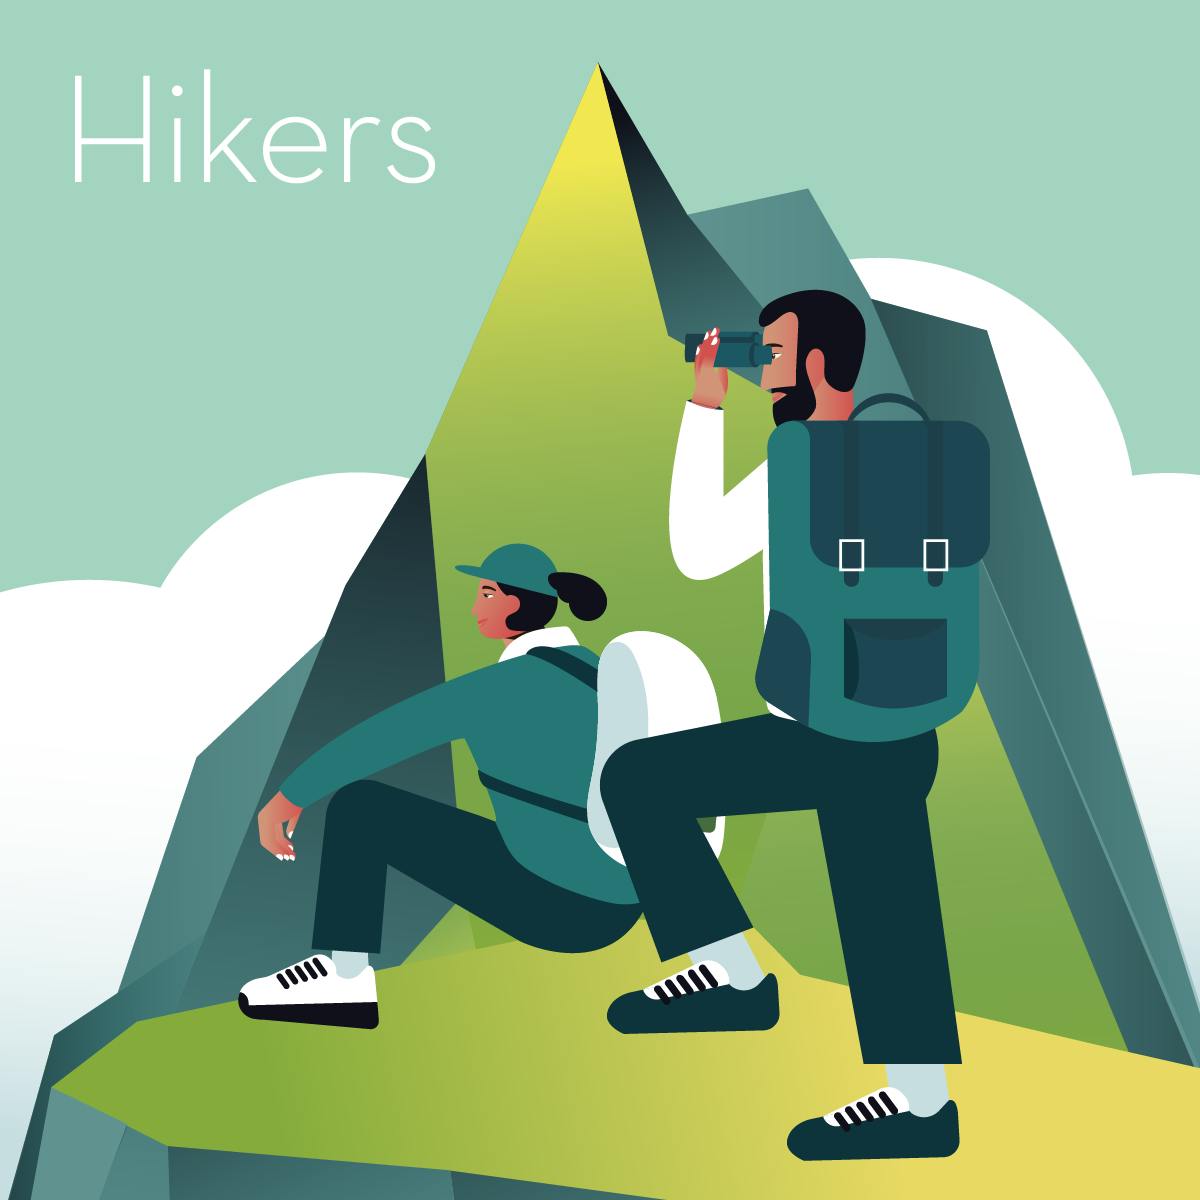 Illustration of a gift guide of gifts for hikers, showing a man and a woman on top of a mountain. They are both wearing backpacks and the man is holding a pair of binoculars.